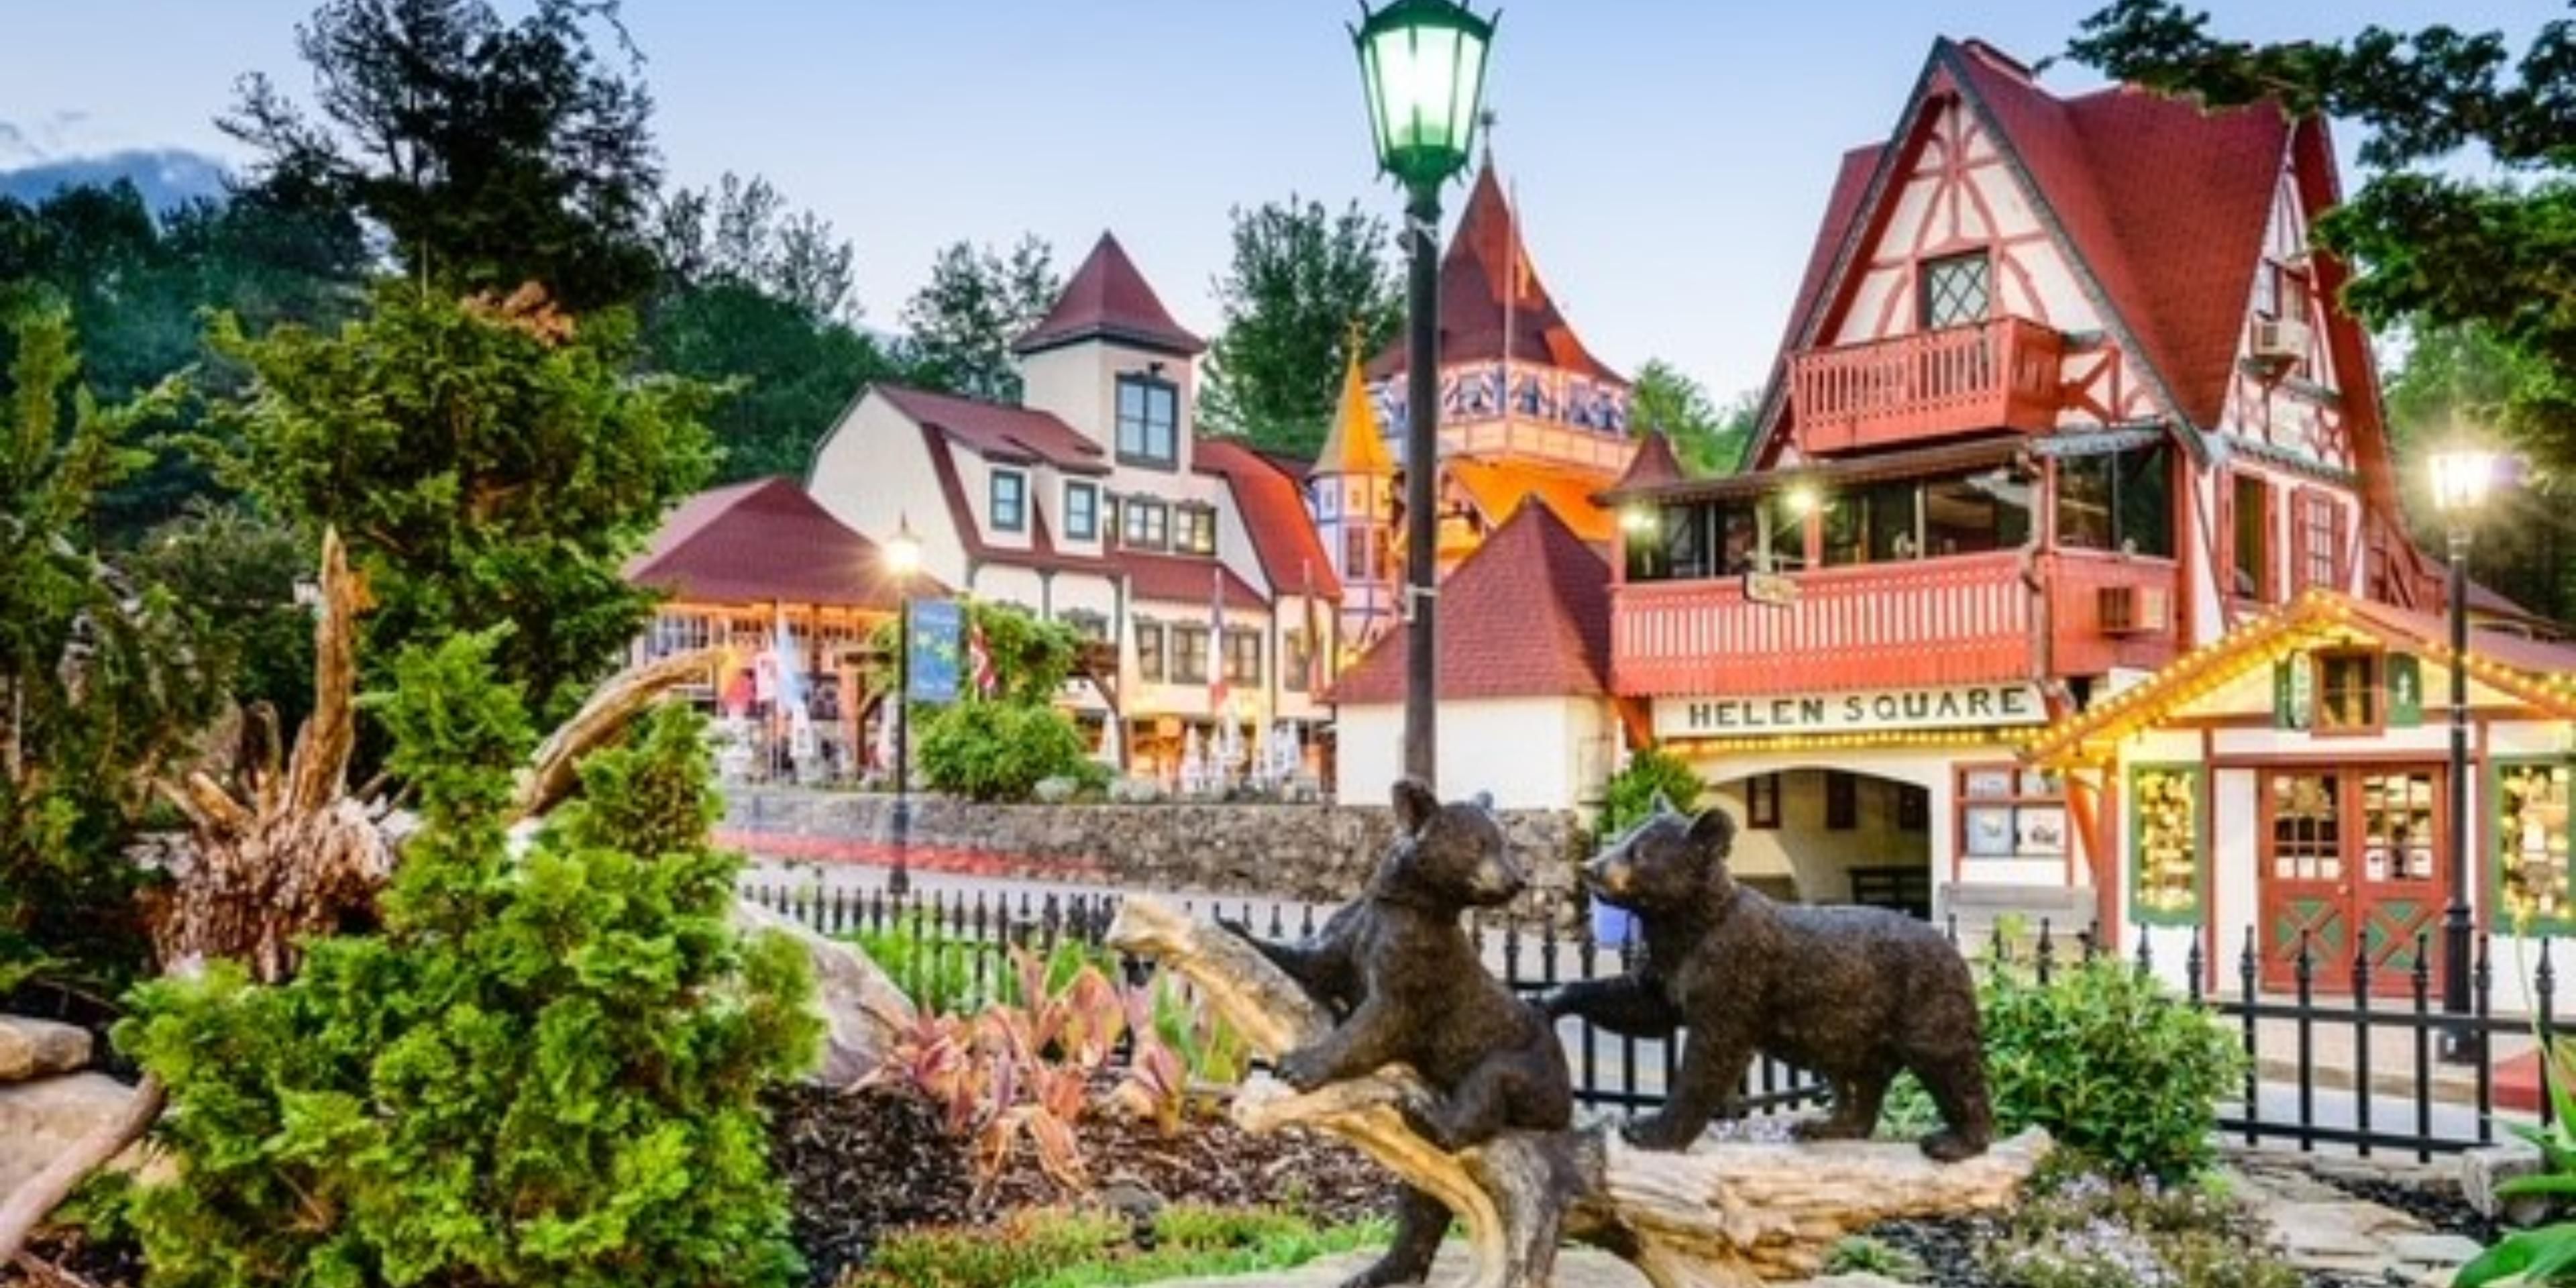 The best little German town in America.  The hotel is located just a few blocks from the center of town.  Easy access to all event and attractions.